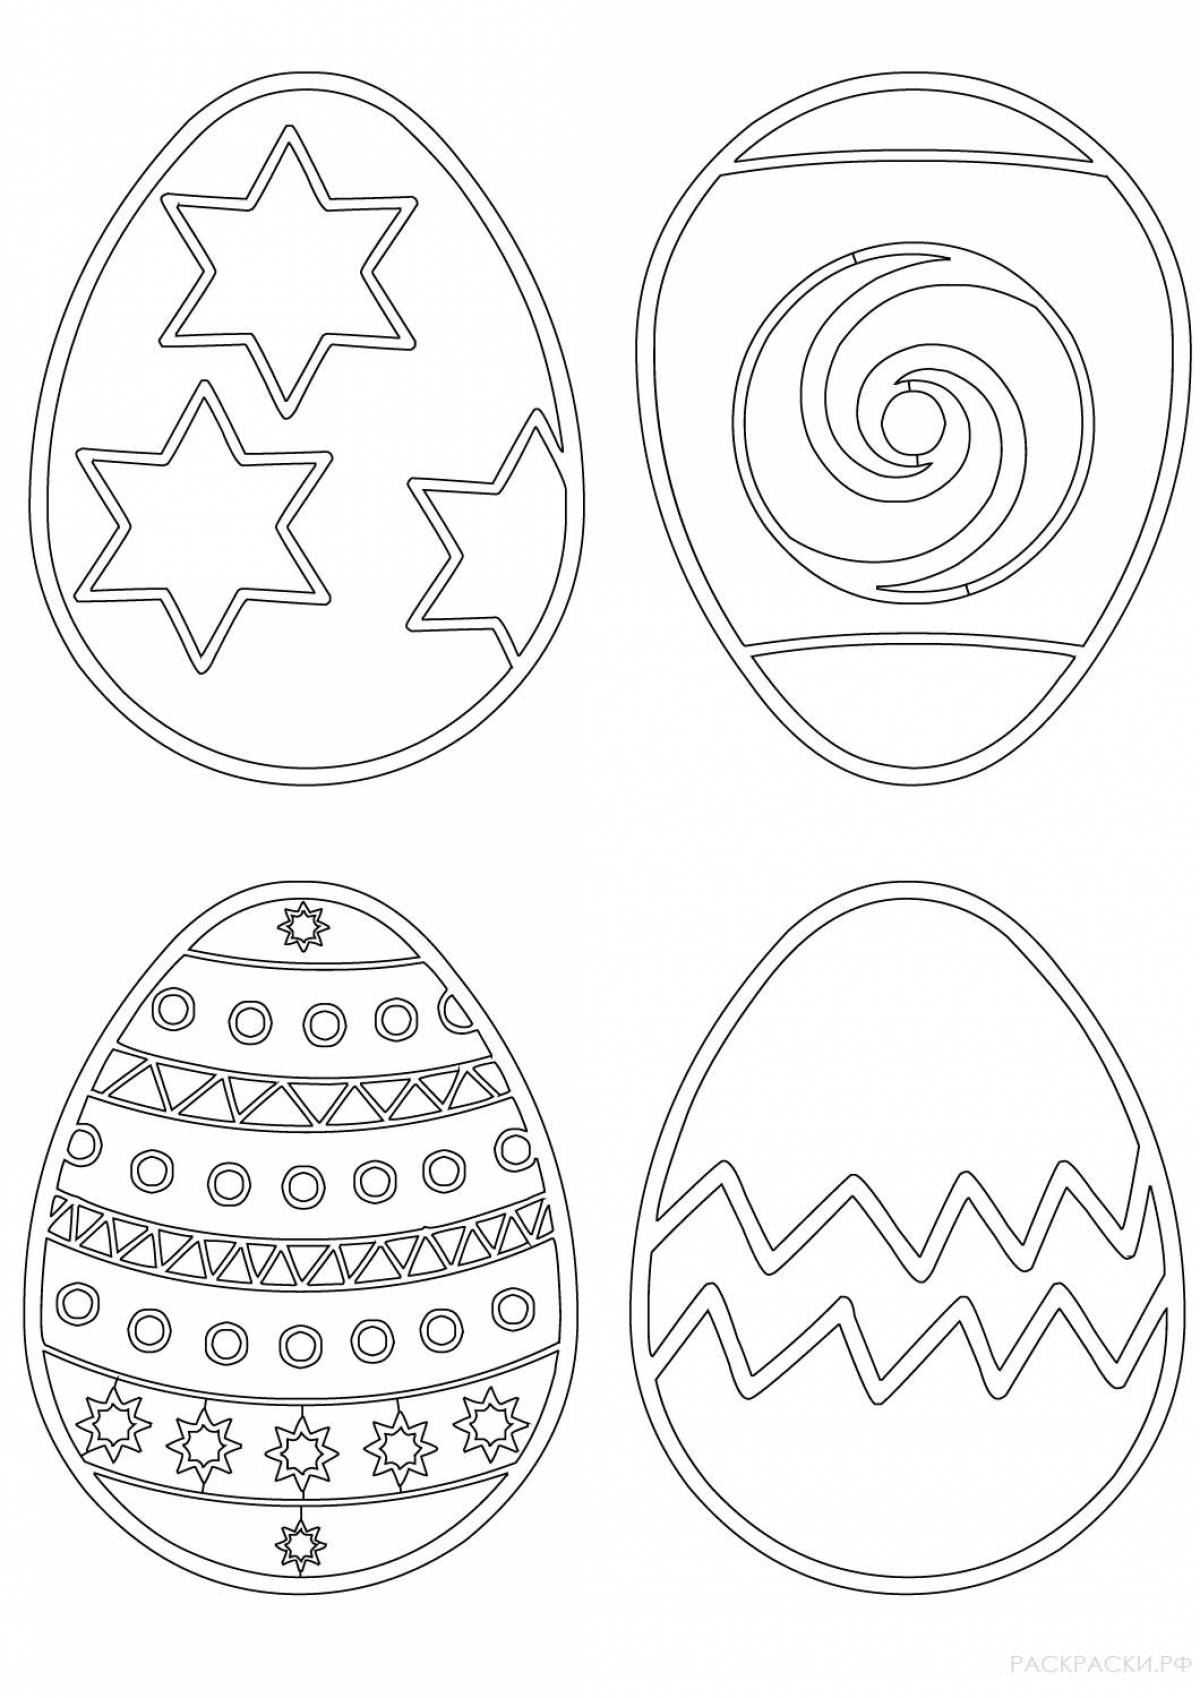 Animated easter egg coloring page